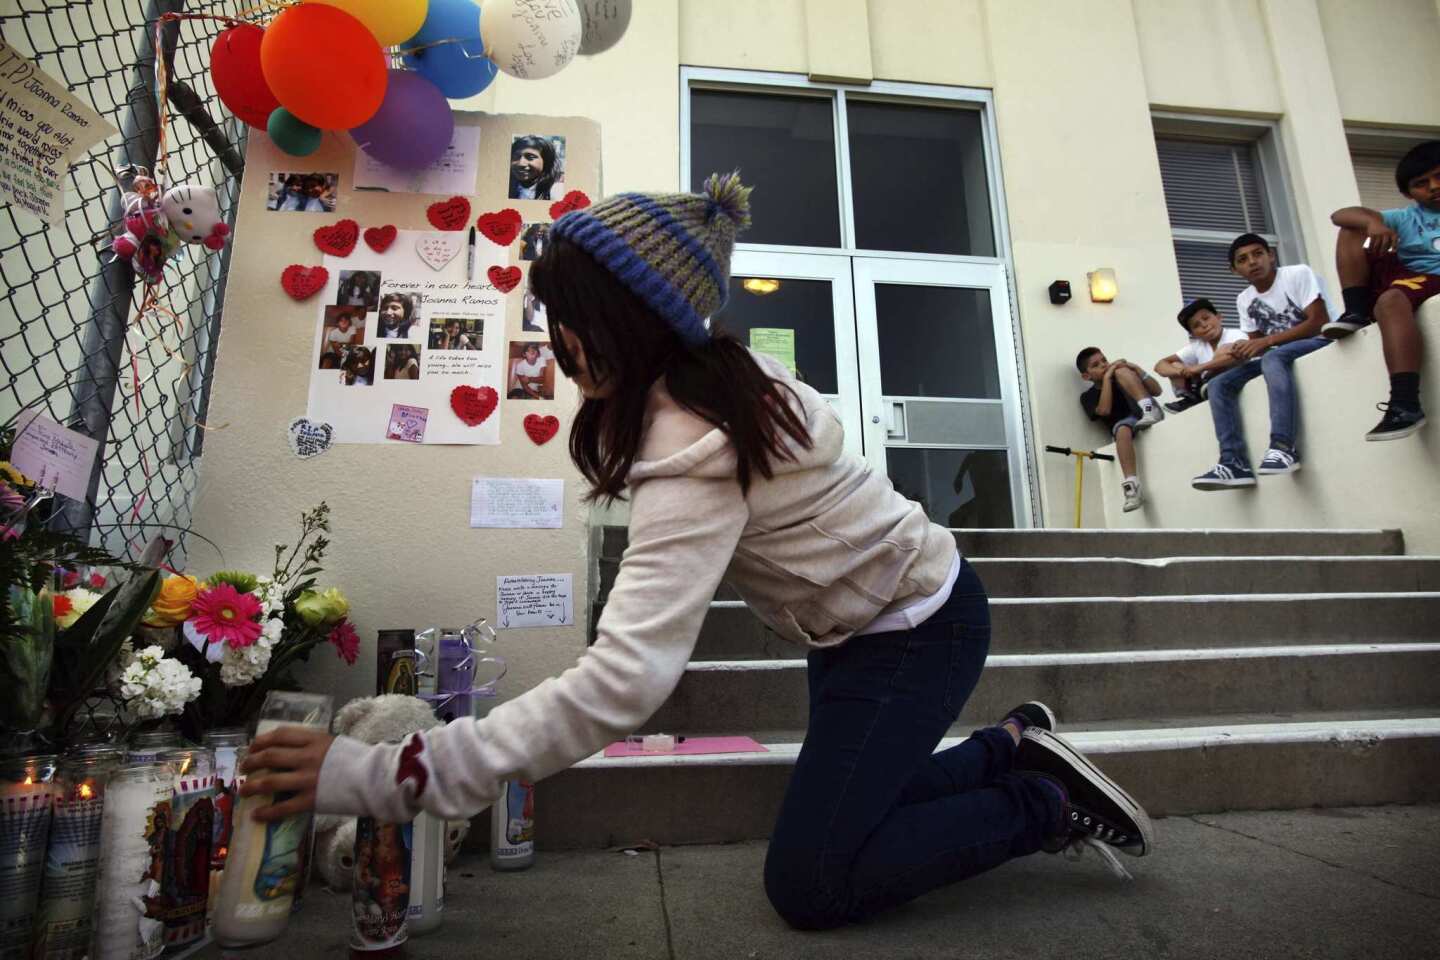 Alexandria Martinez, 12, lights a candle for her best friend Joanna Ramos, 10, who died hours after fighting briefly with another girl.